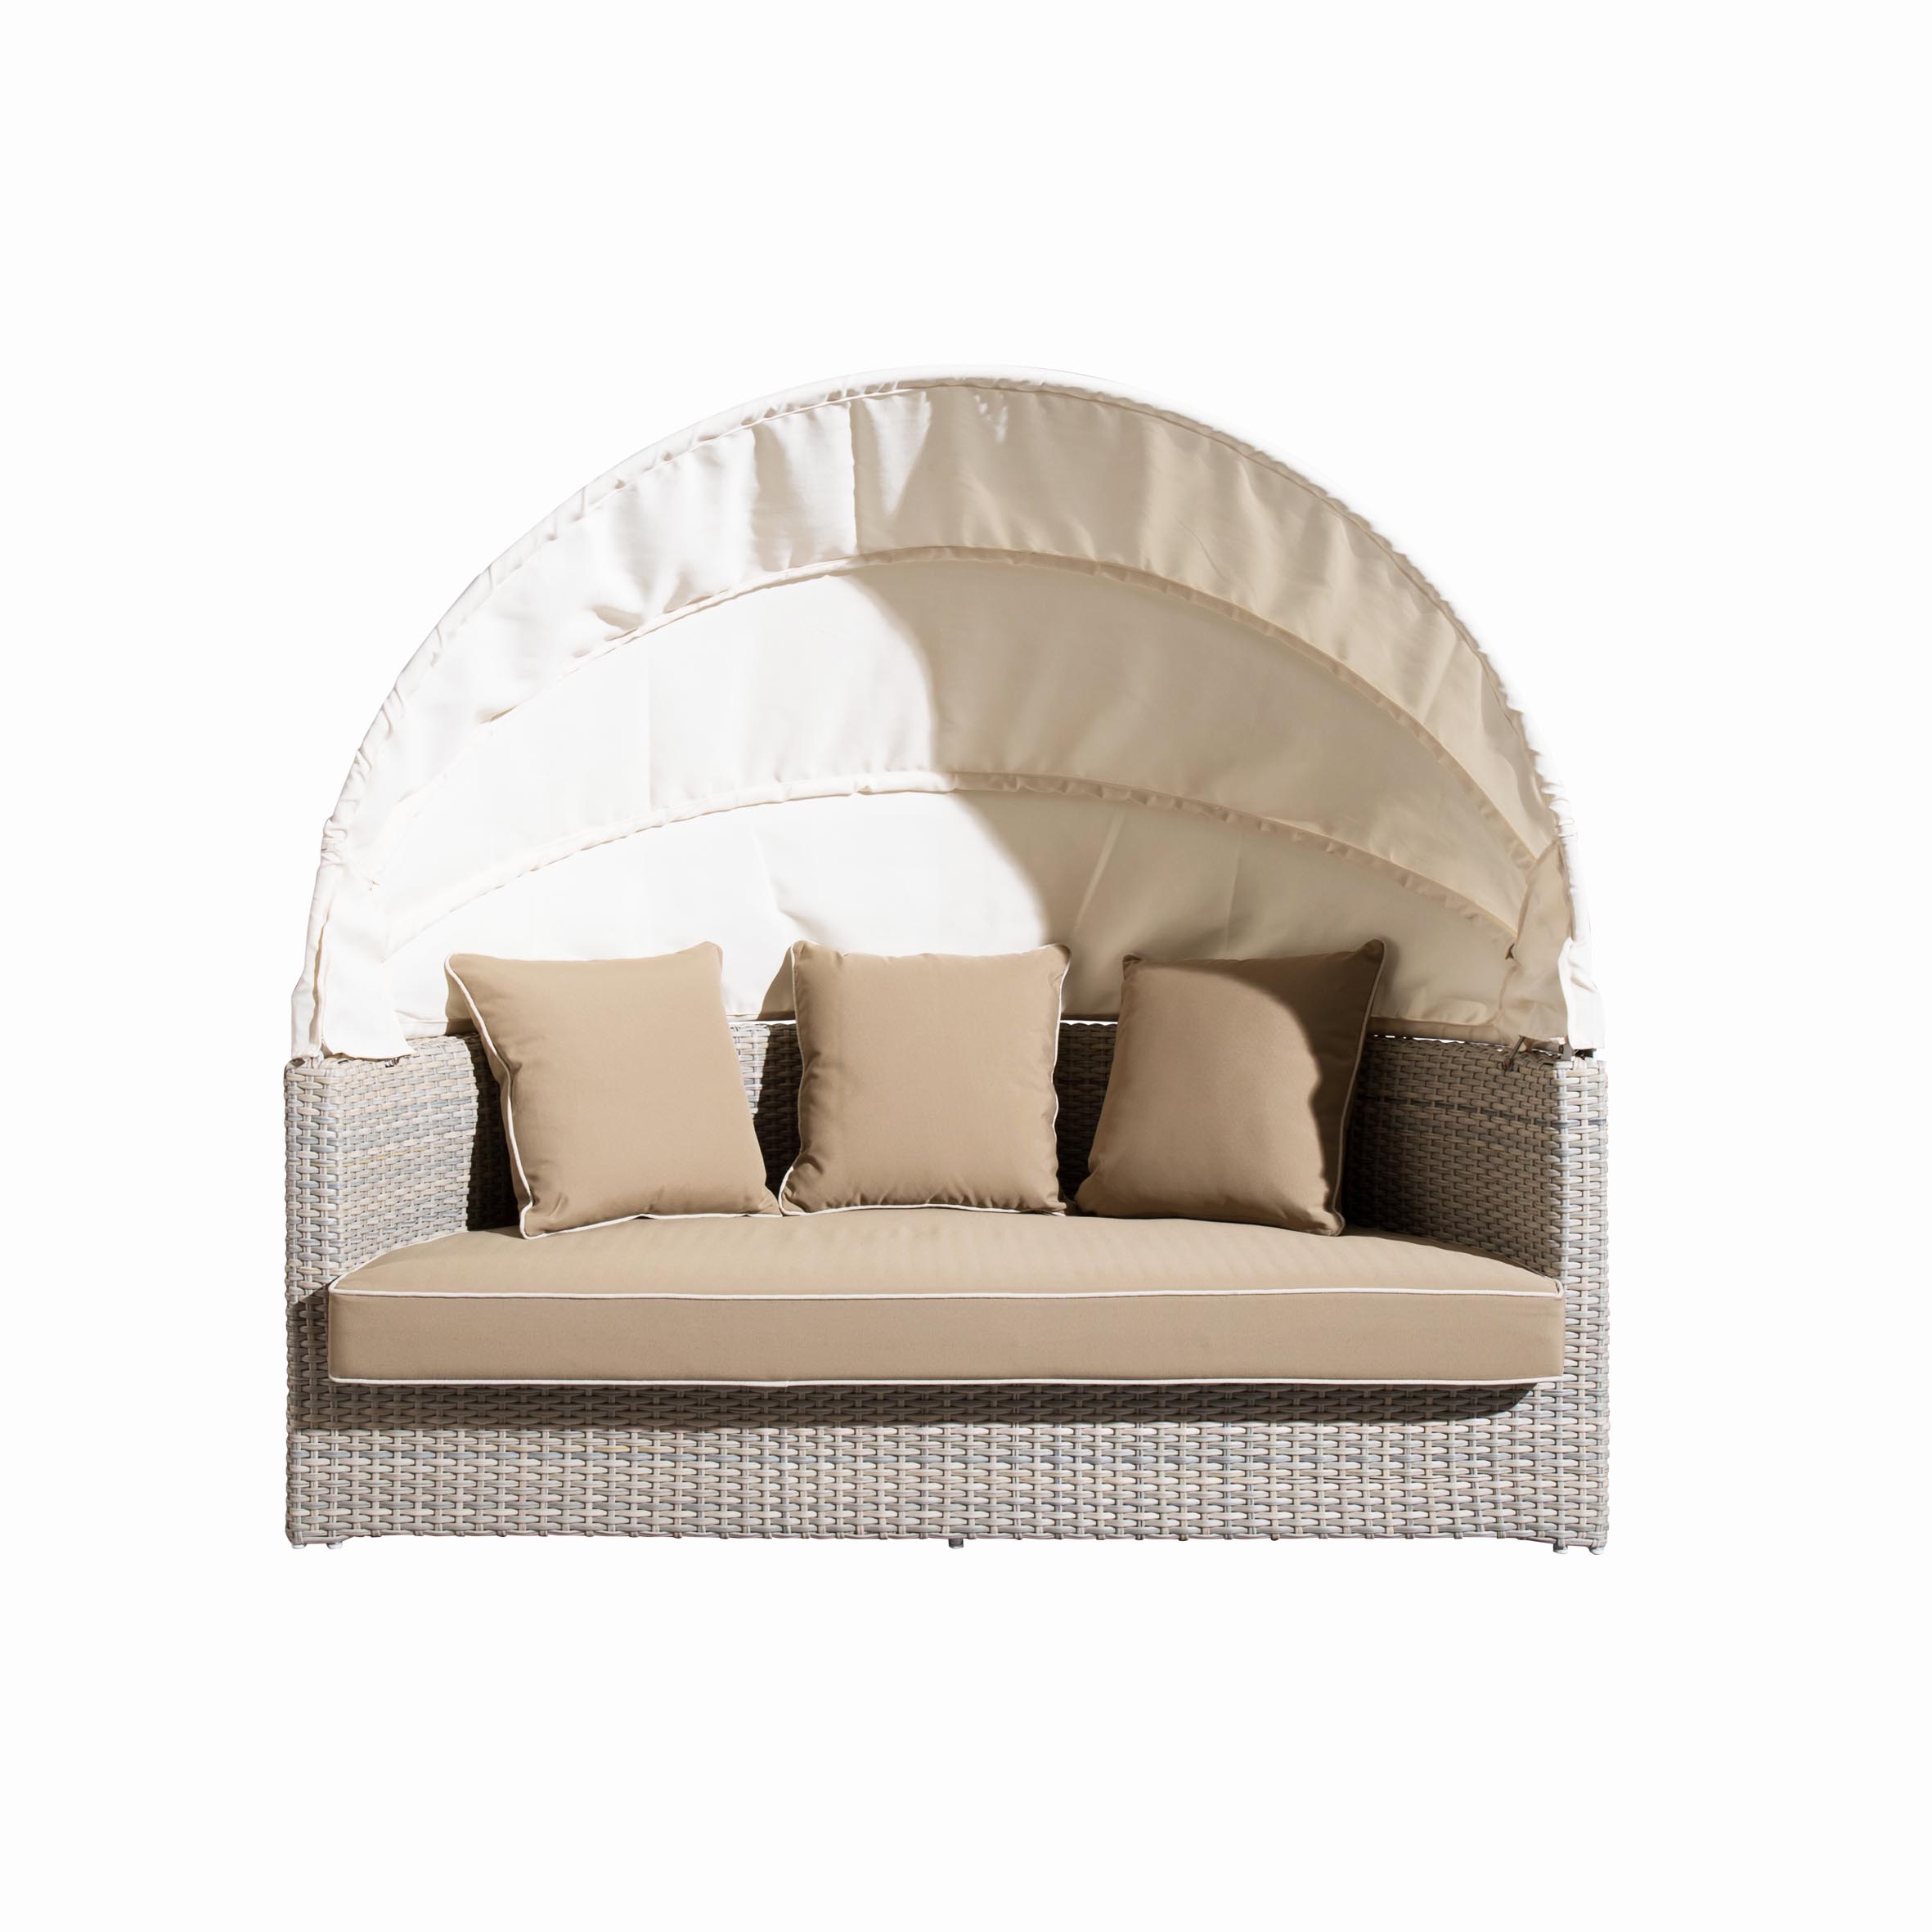 Ideal rattan round daybed S5